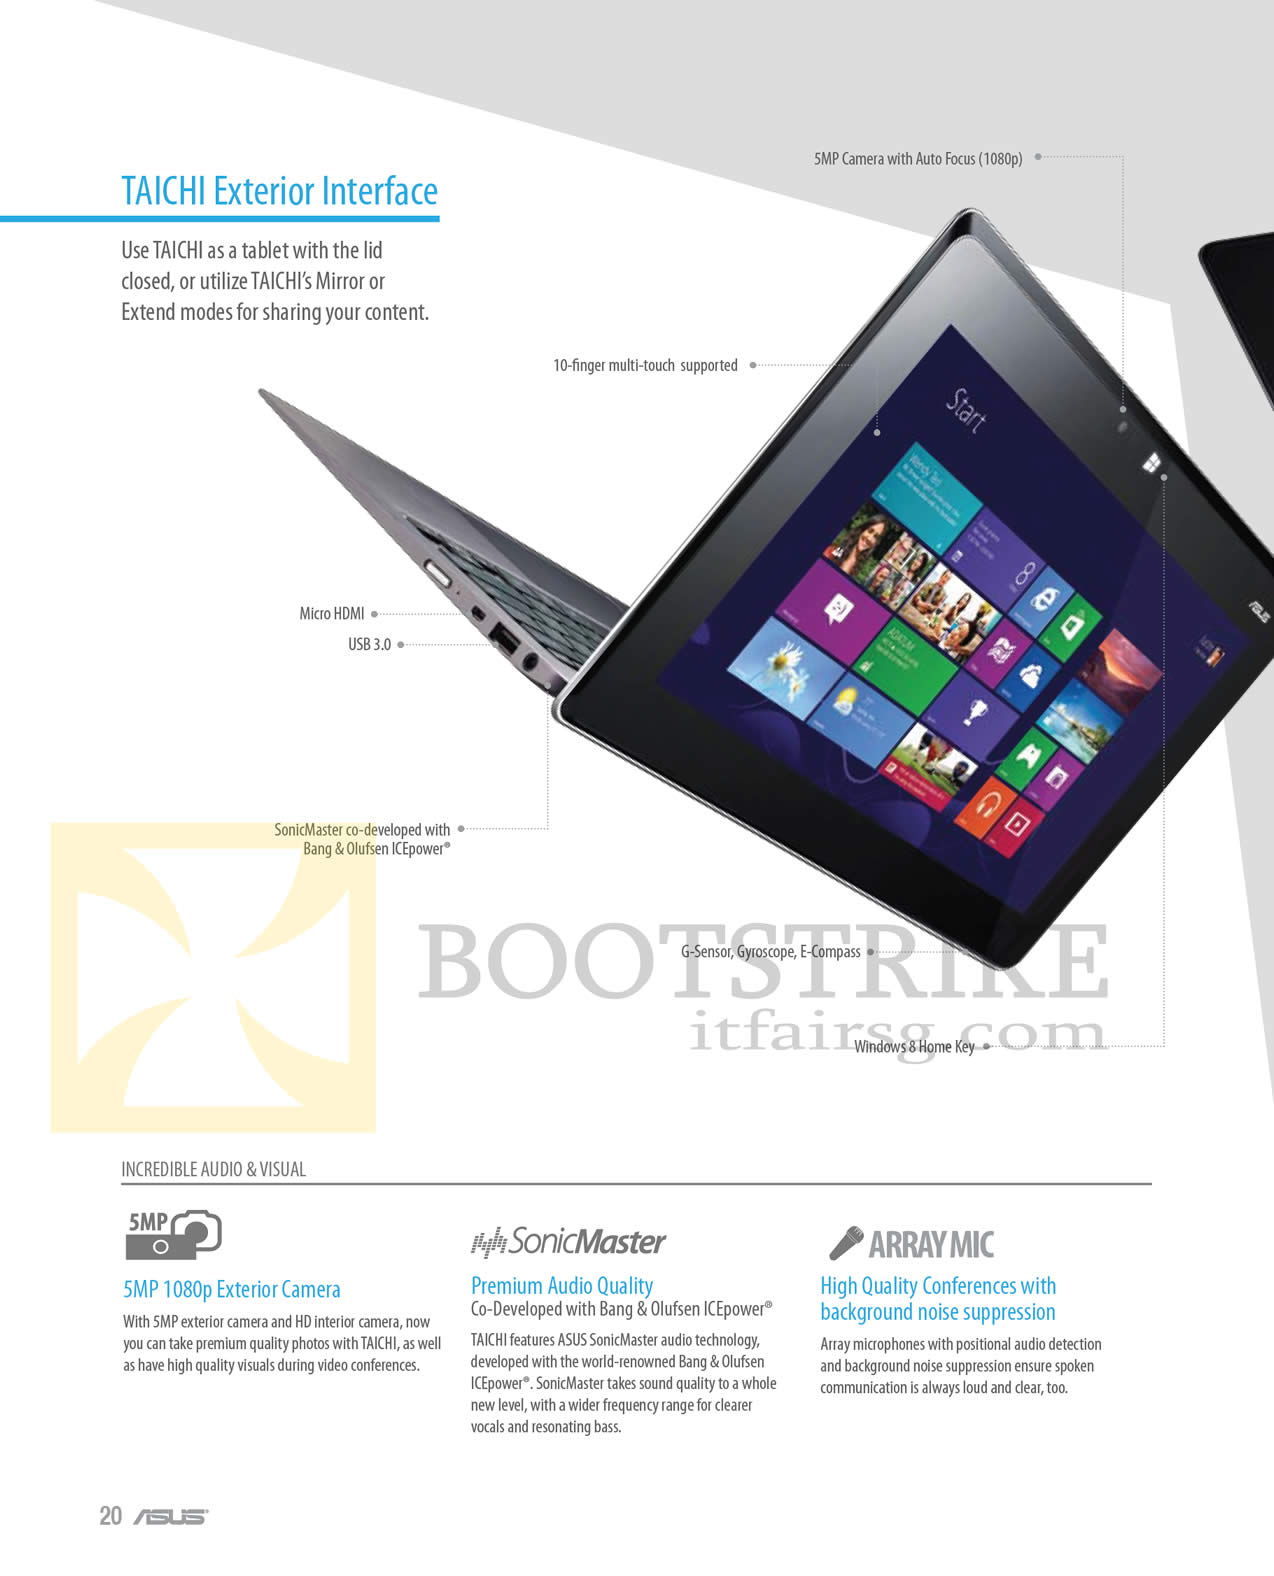 PC SHOW 2013 price list image brochure of ASUS Notebooks Taichi Exterior Interface, Audio, Visual, SonicMaster